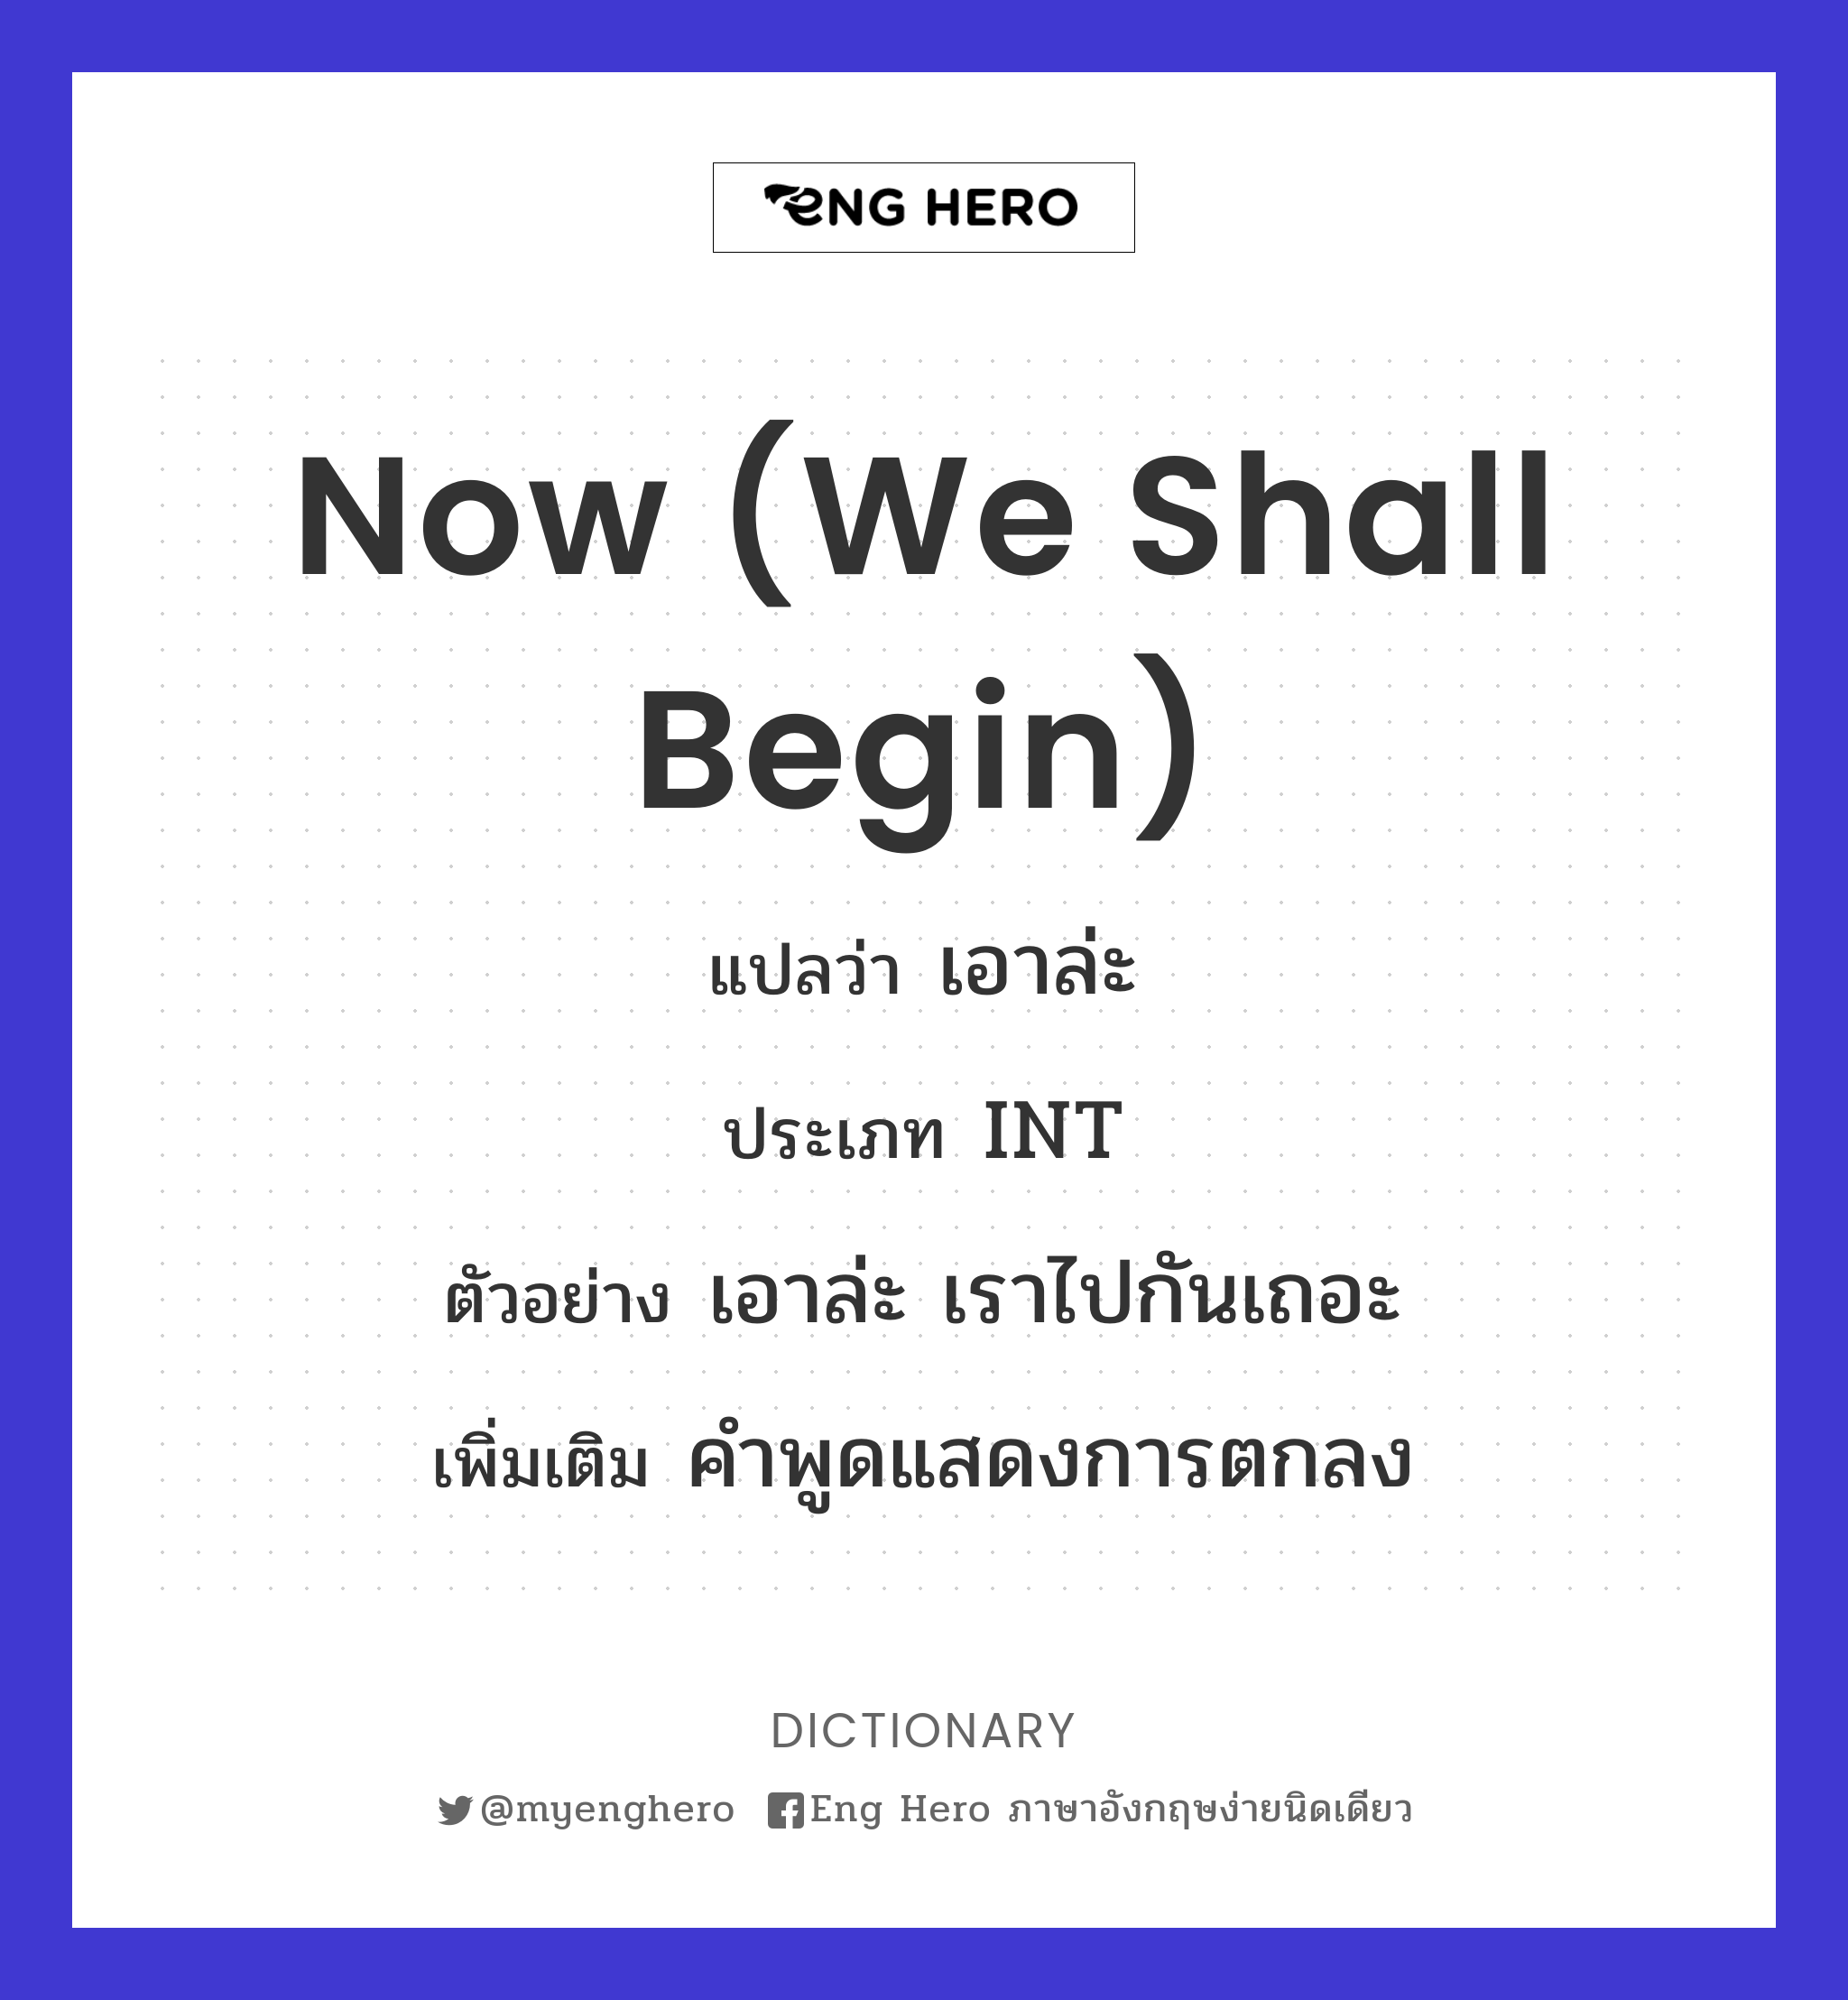 now (we shall begin)